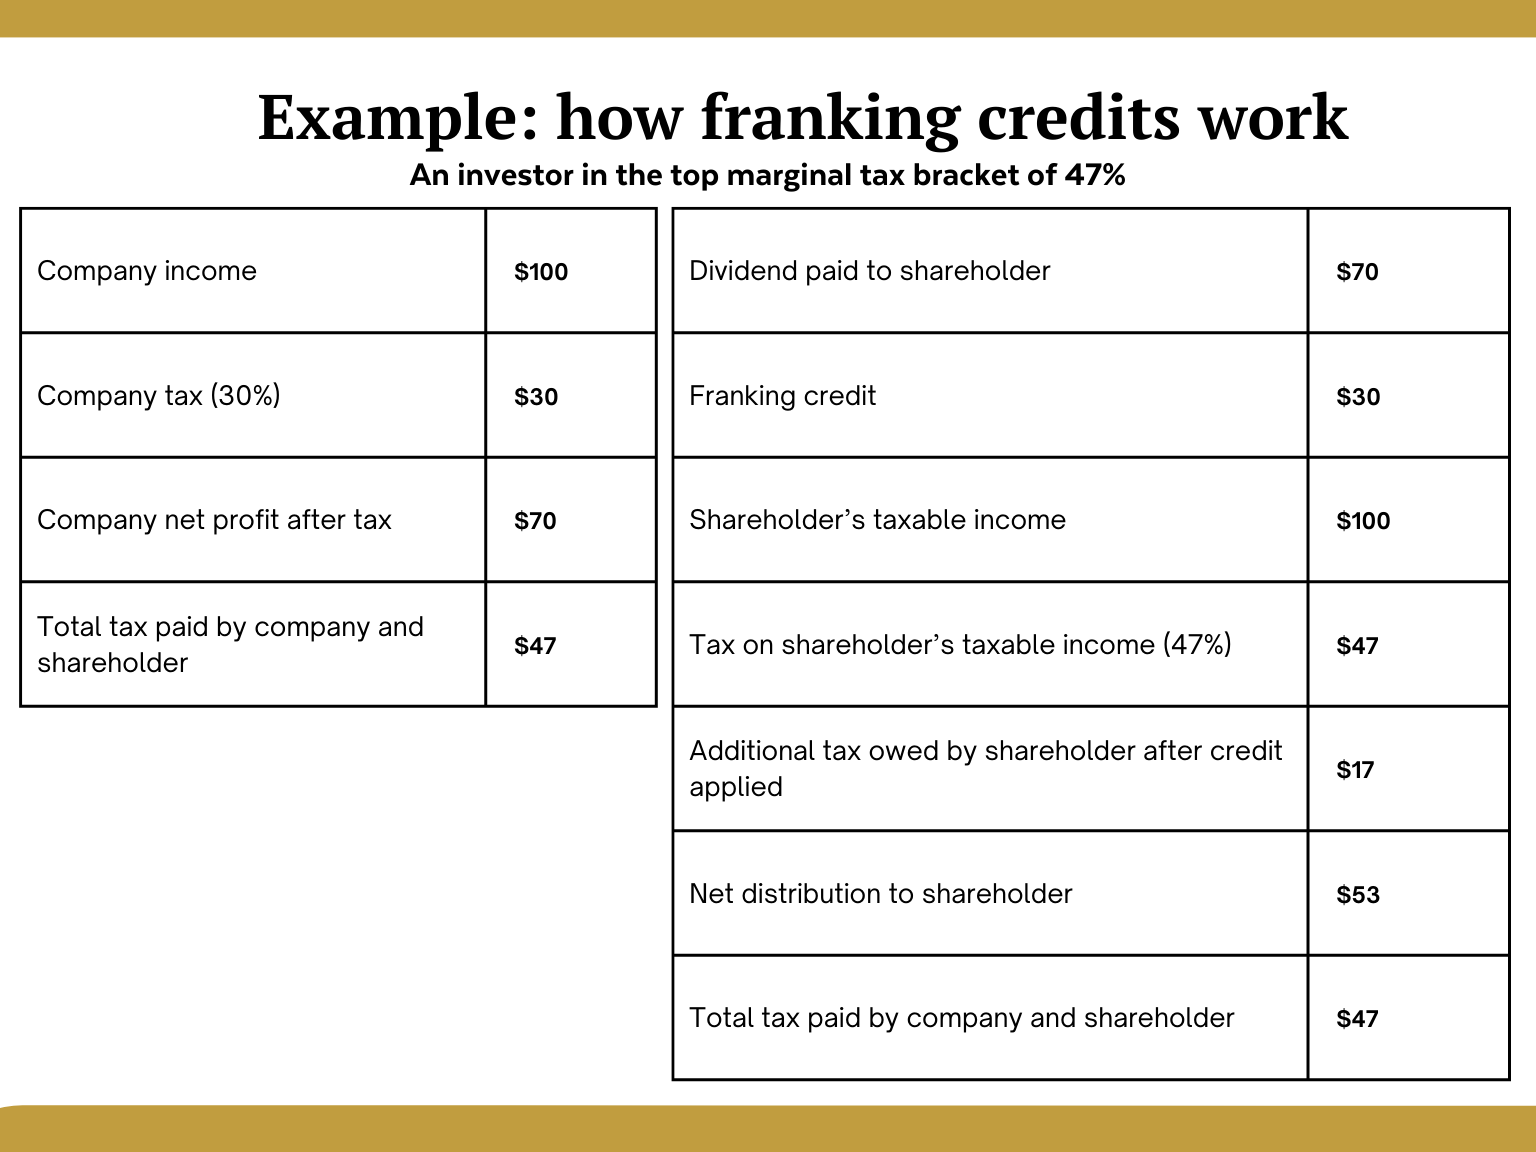 the-divide-nd-of-income-how-to-invest-for-franking-credits-sara